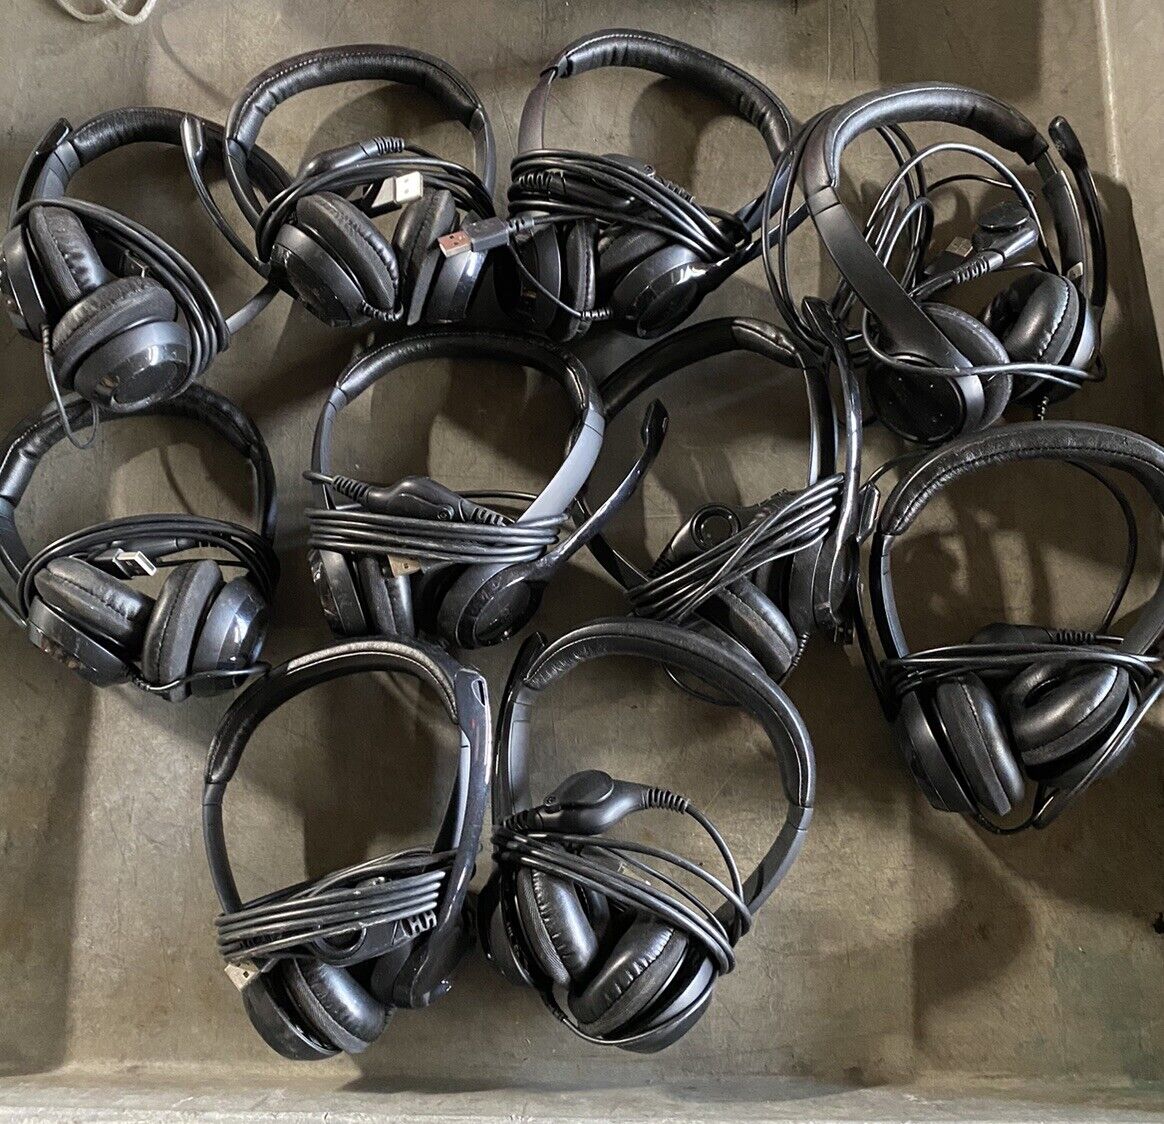 LOT OF 10X Logitech H390 USB Computer PC Headset w/Noise Cancelling Microphone